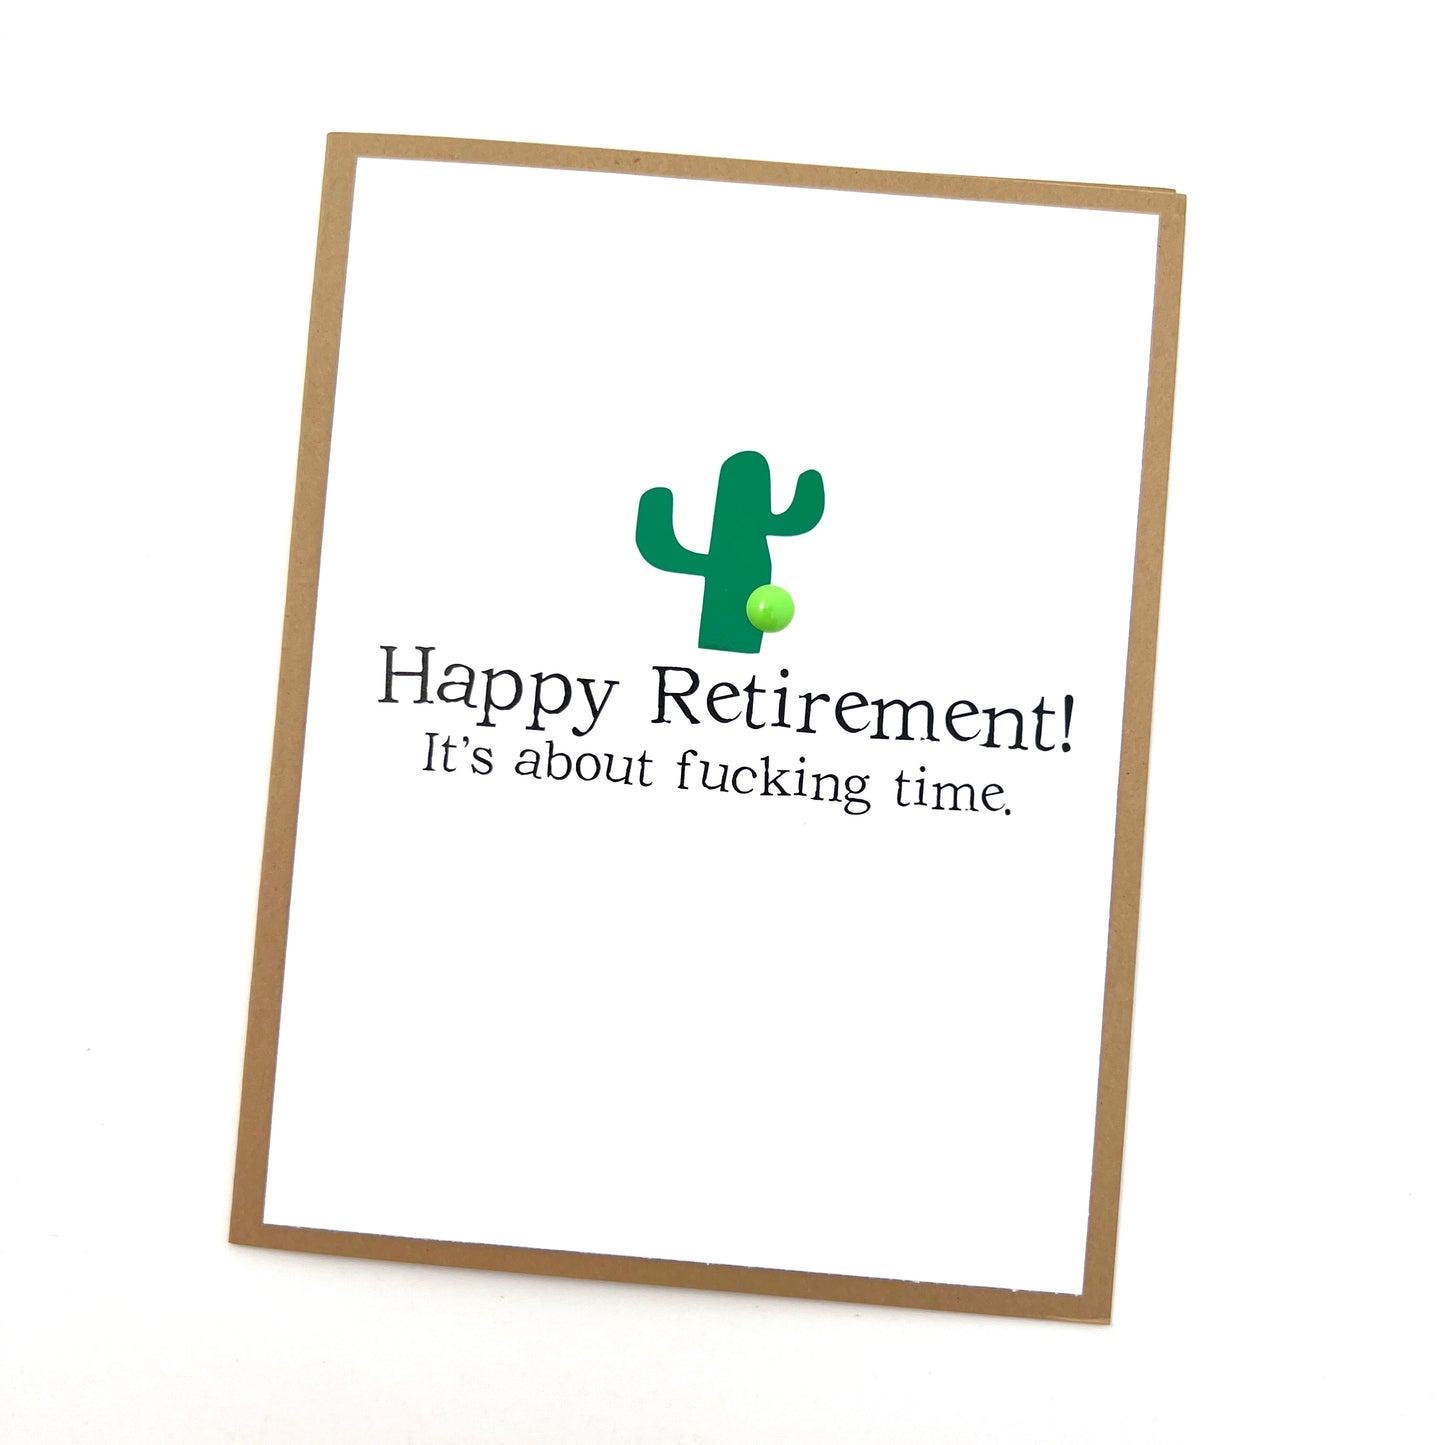 About Fucking Time Retirement card